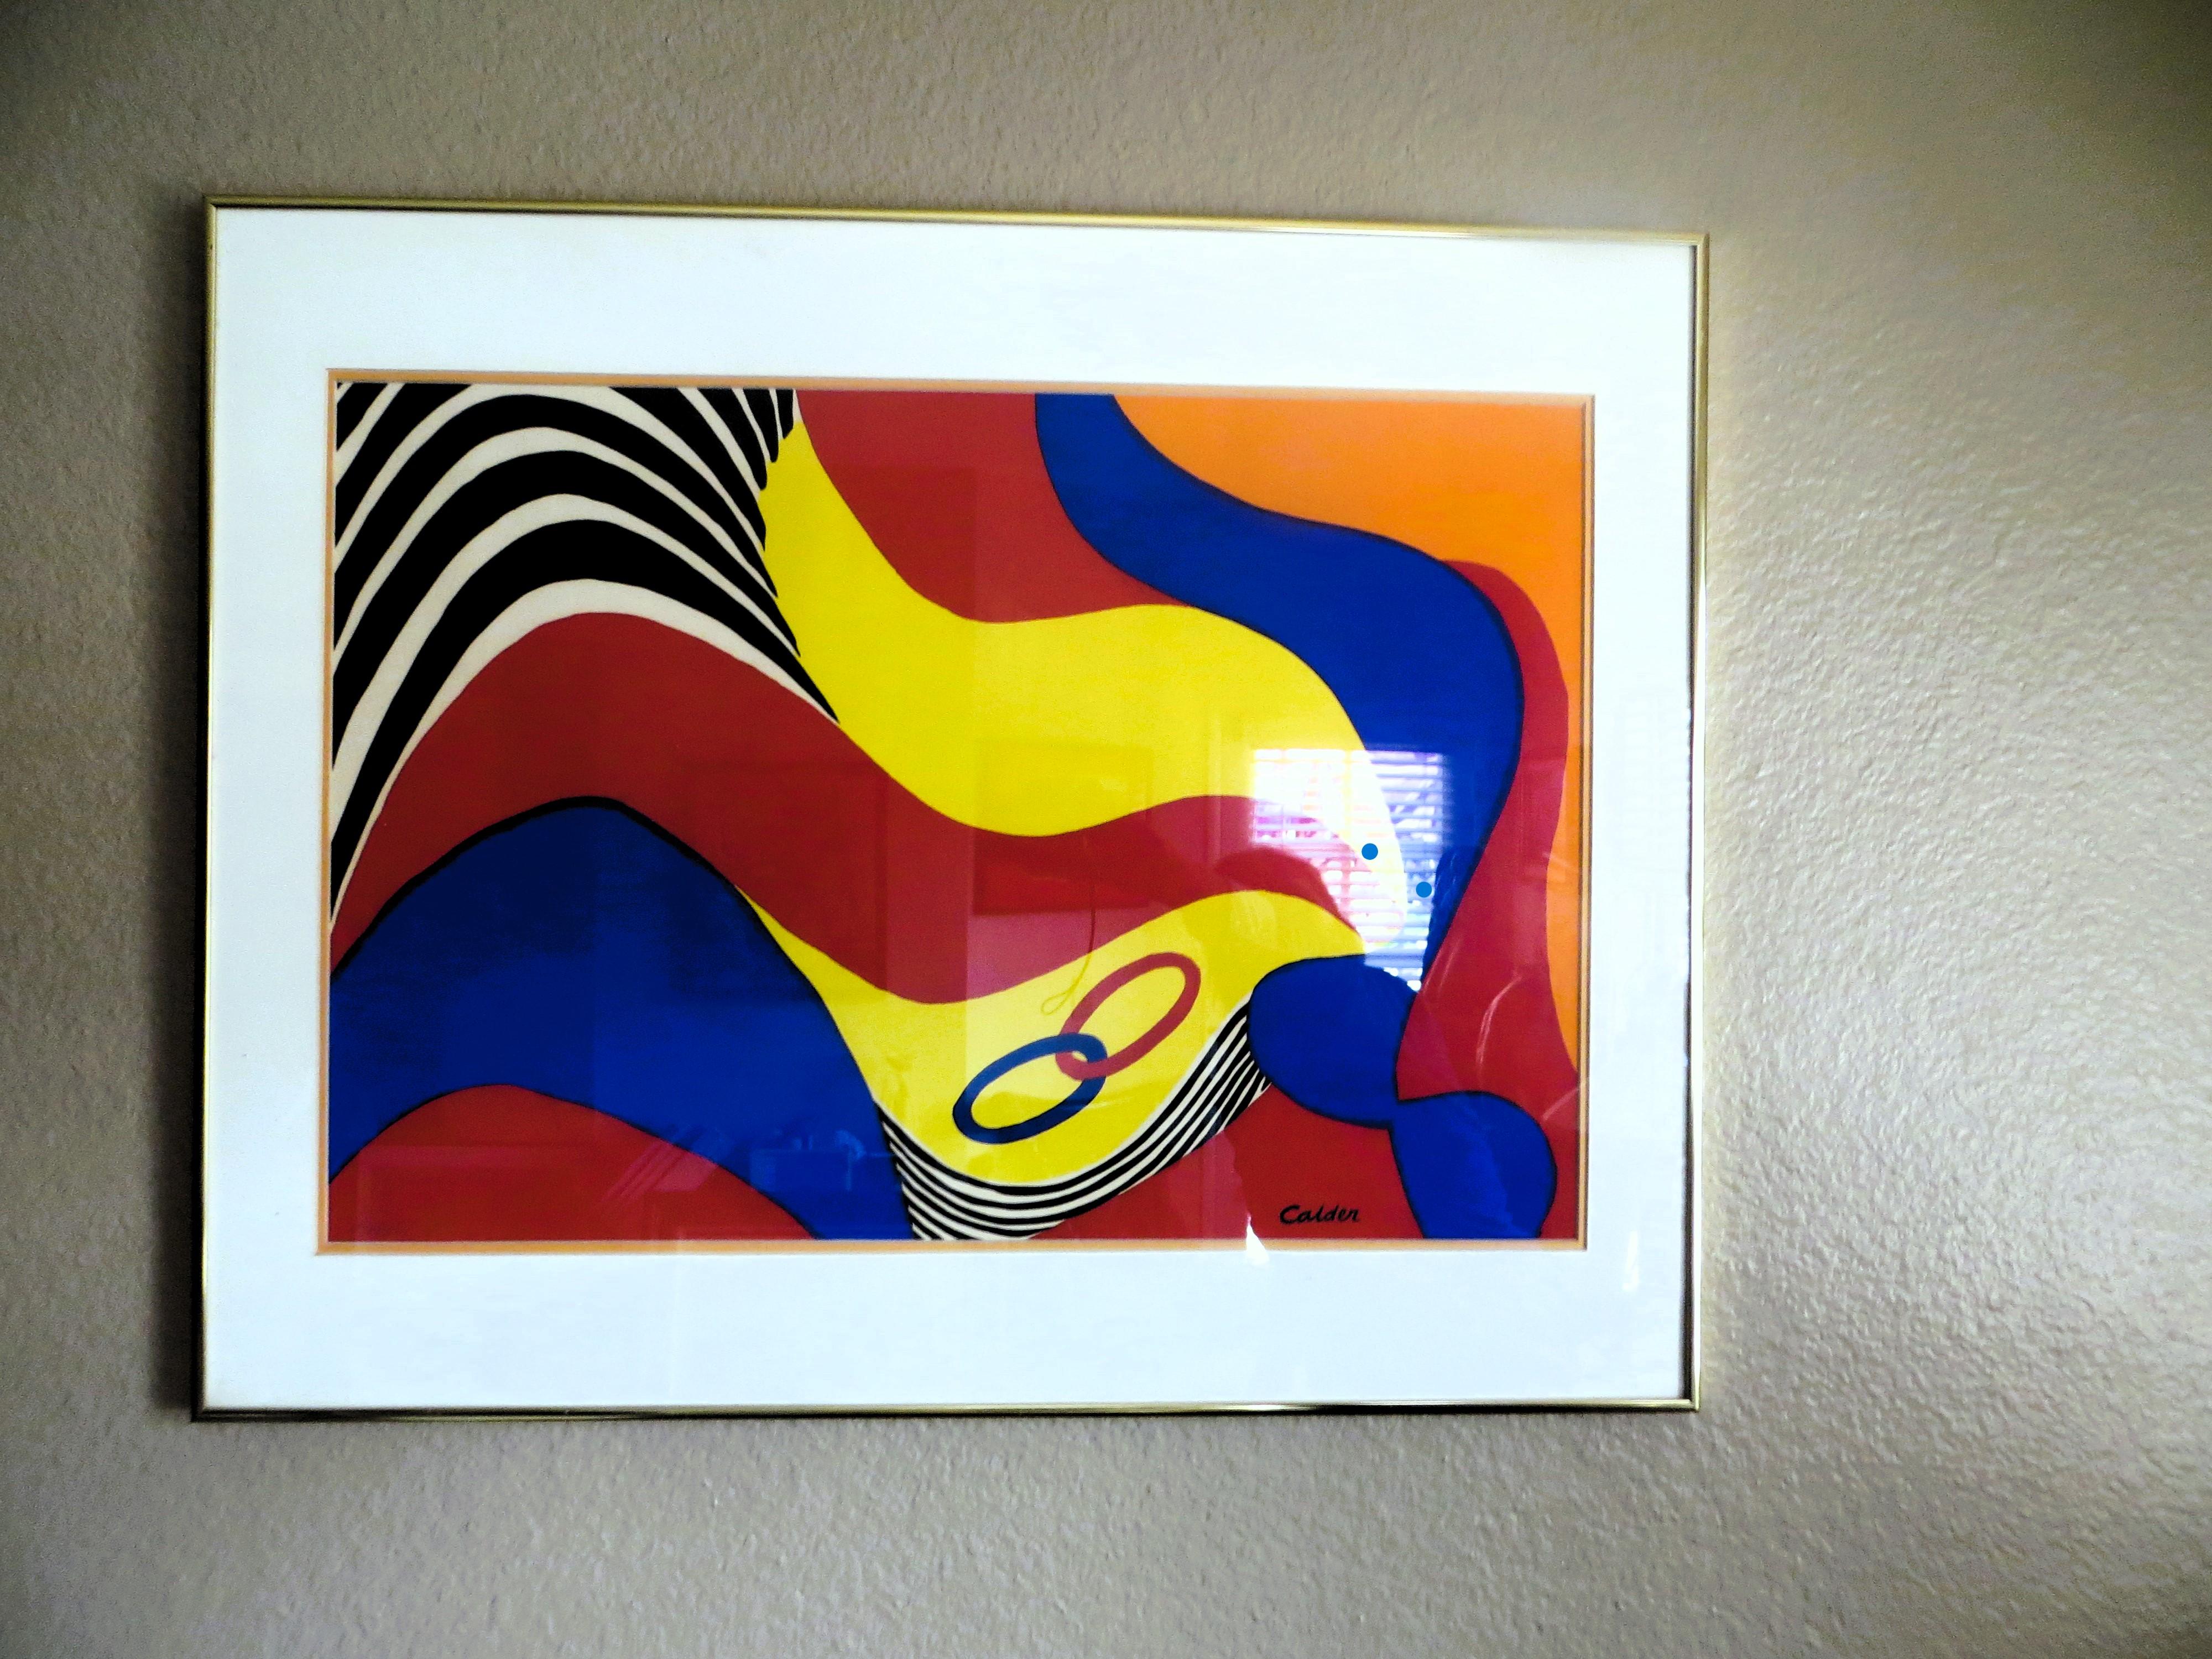  CalderAbstract lithograph Flying colors 1975 limitierte Auflage  im Angebot 4